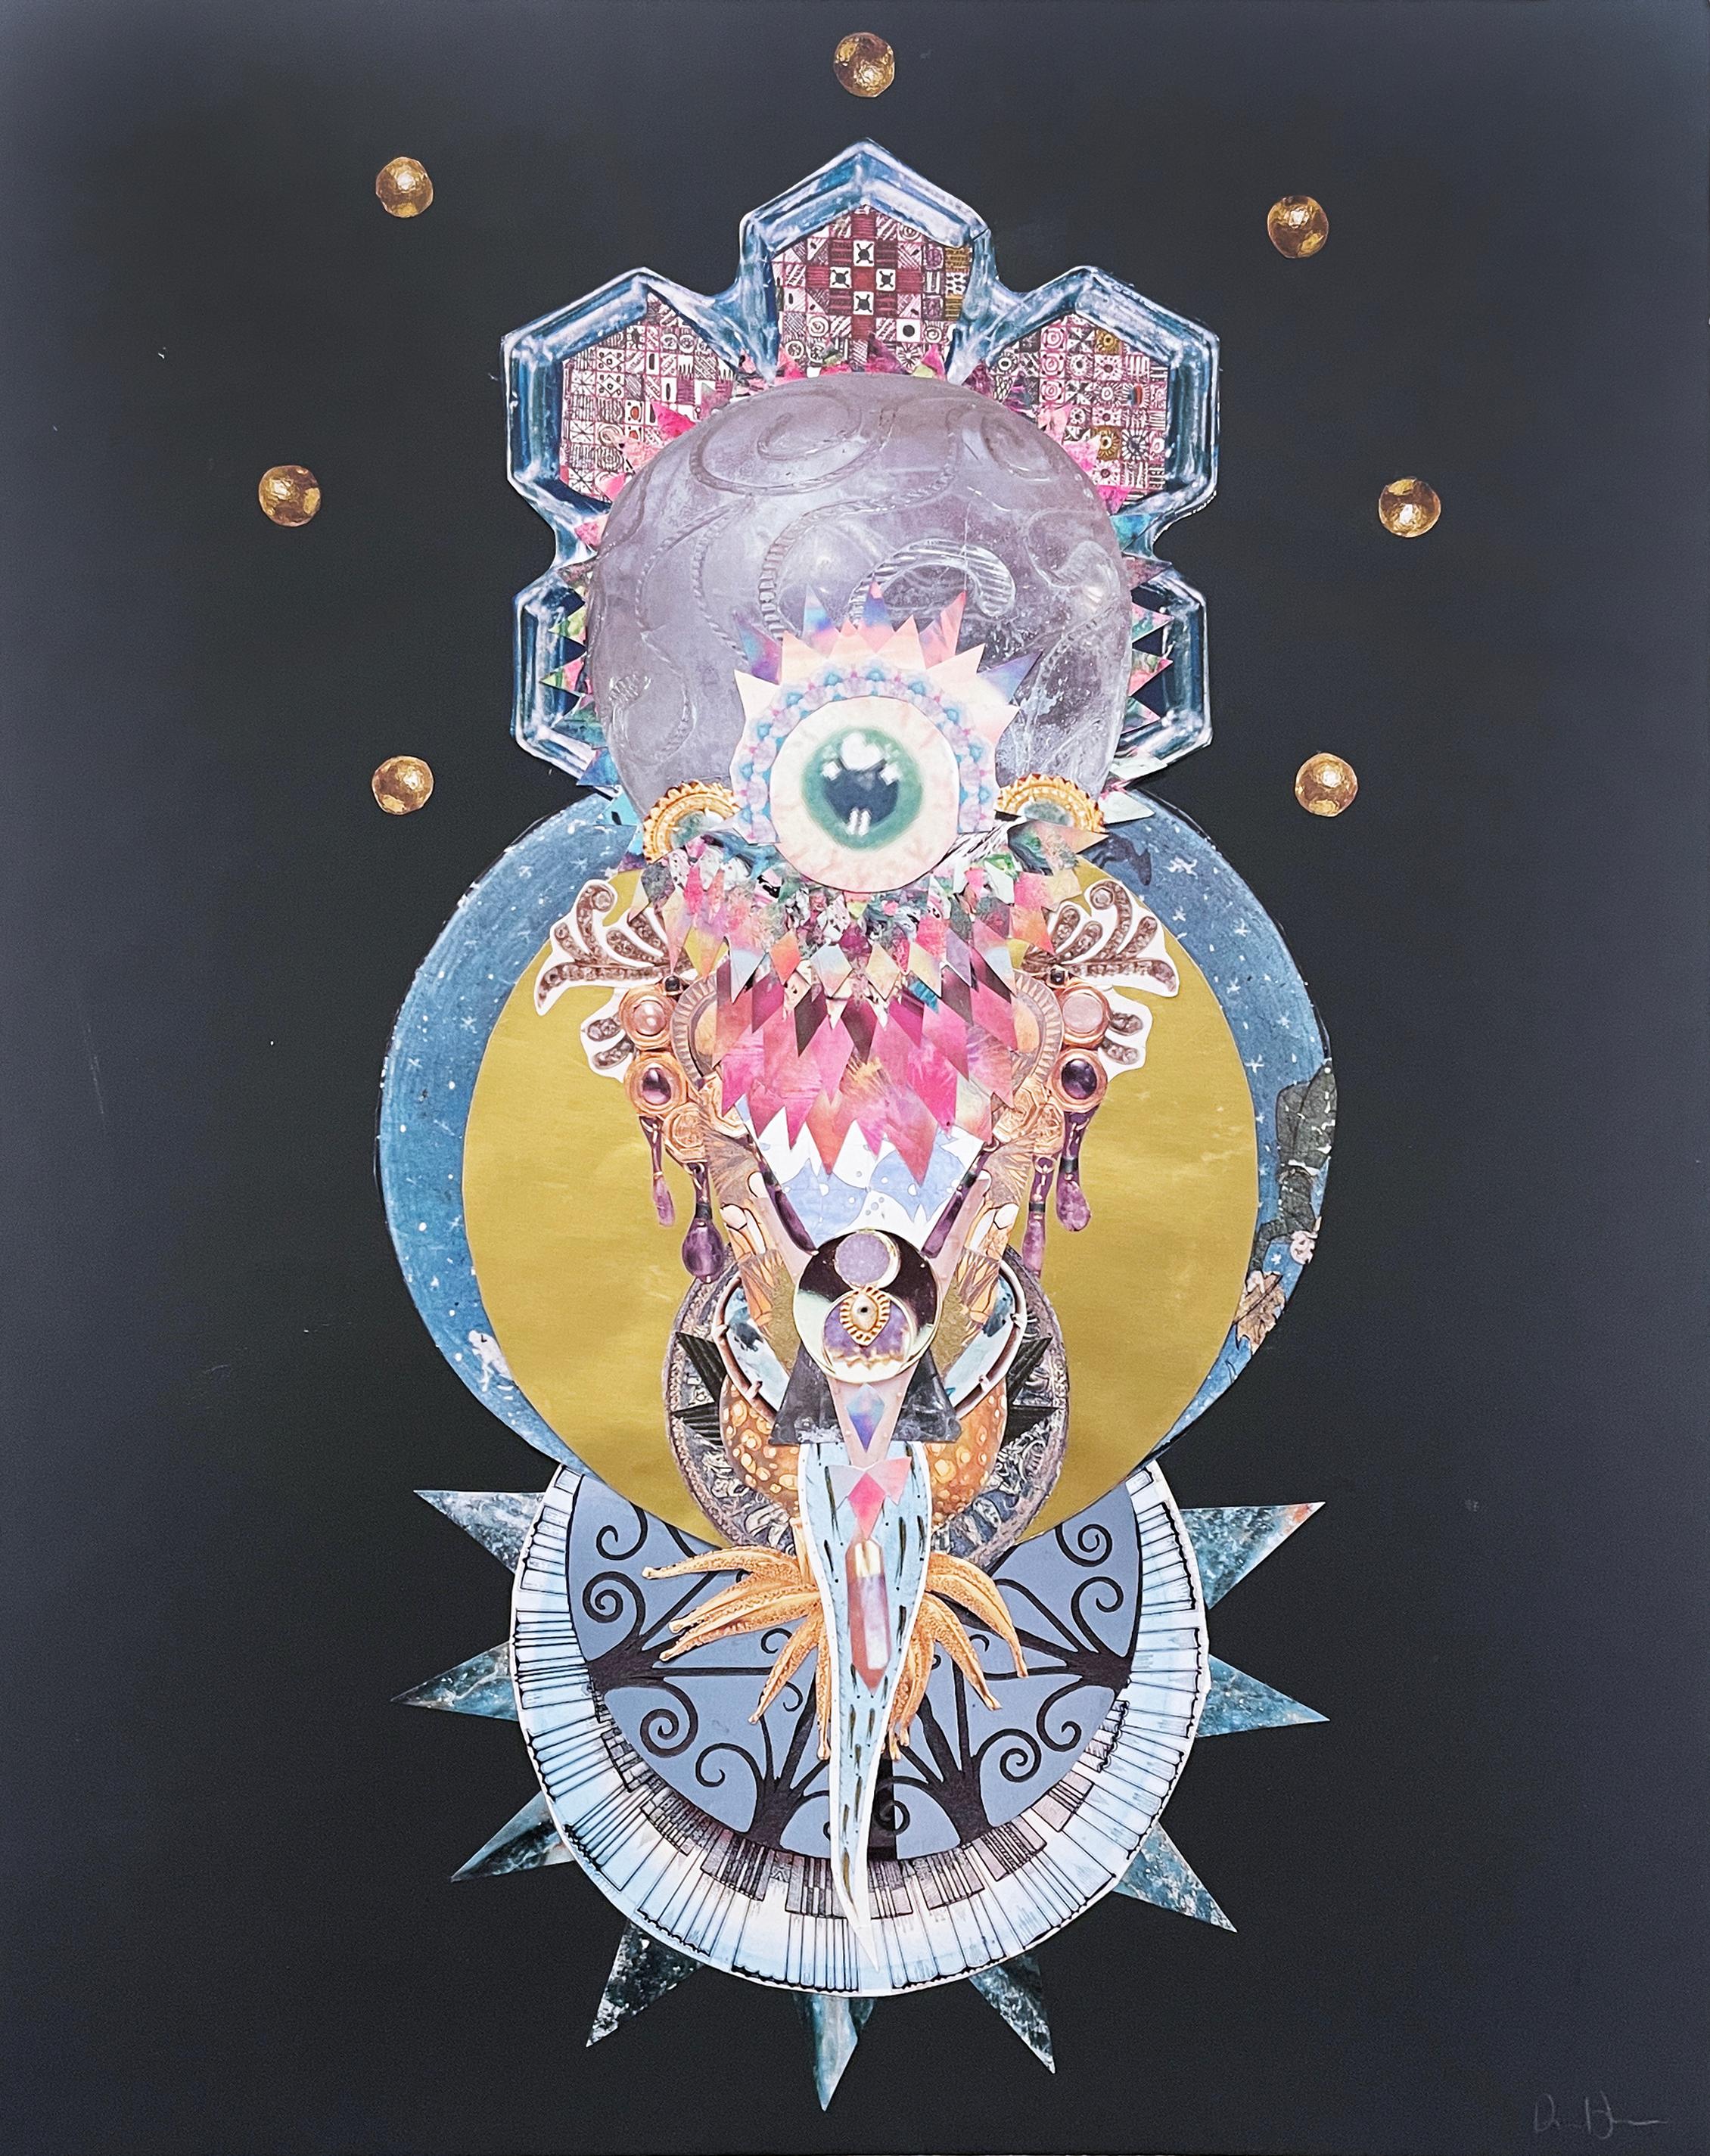 The Messenger, 2022, cosmic art, surreal, abstract, collage, star, eye, gold - Mixed Media Art by Deming King Harriman